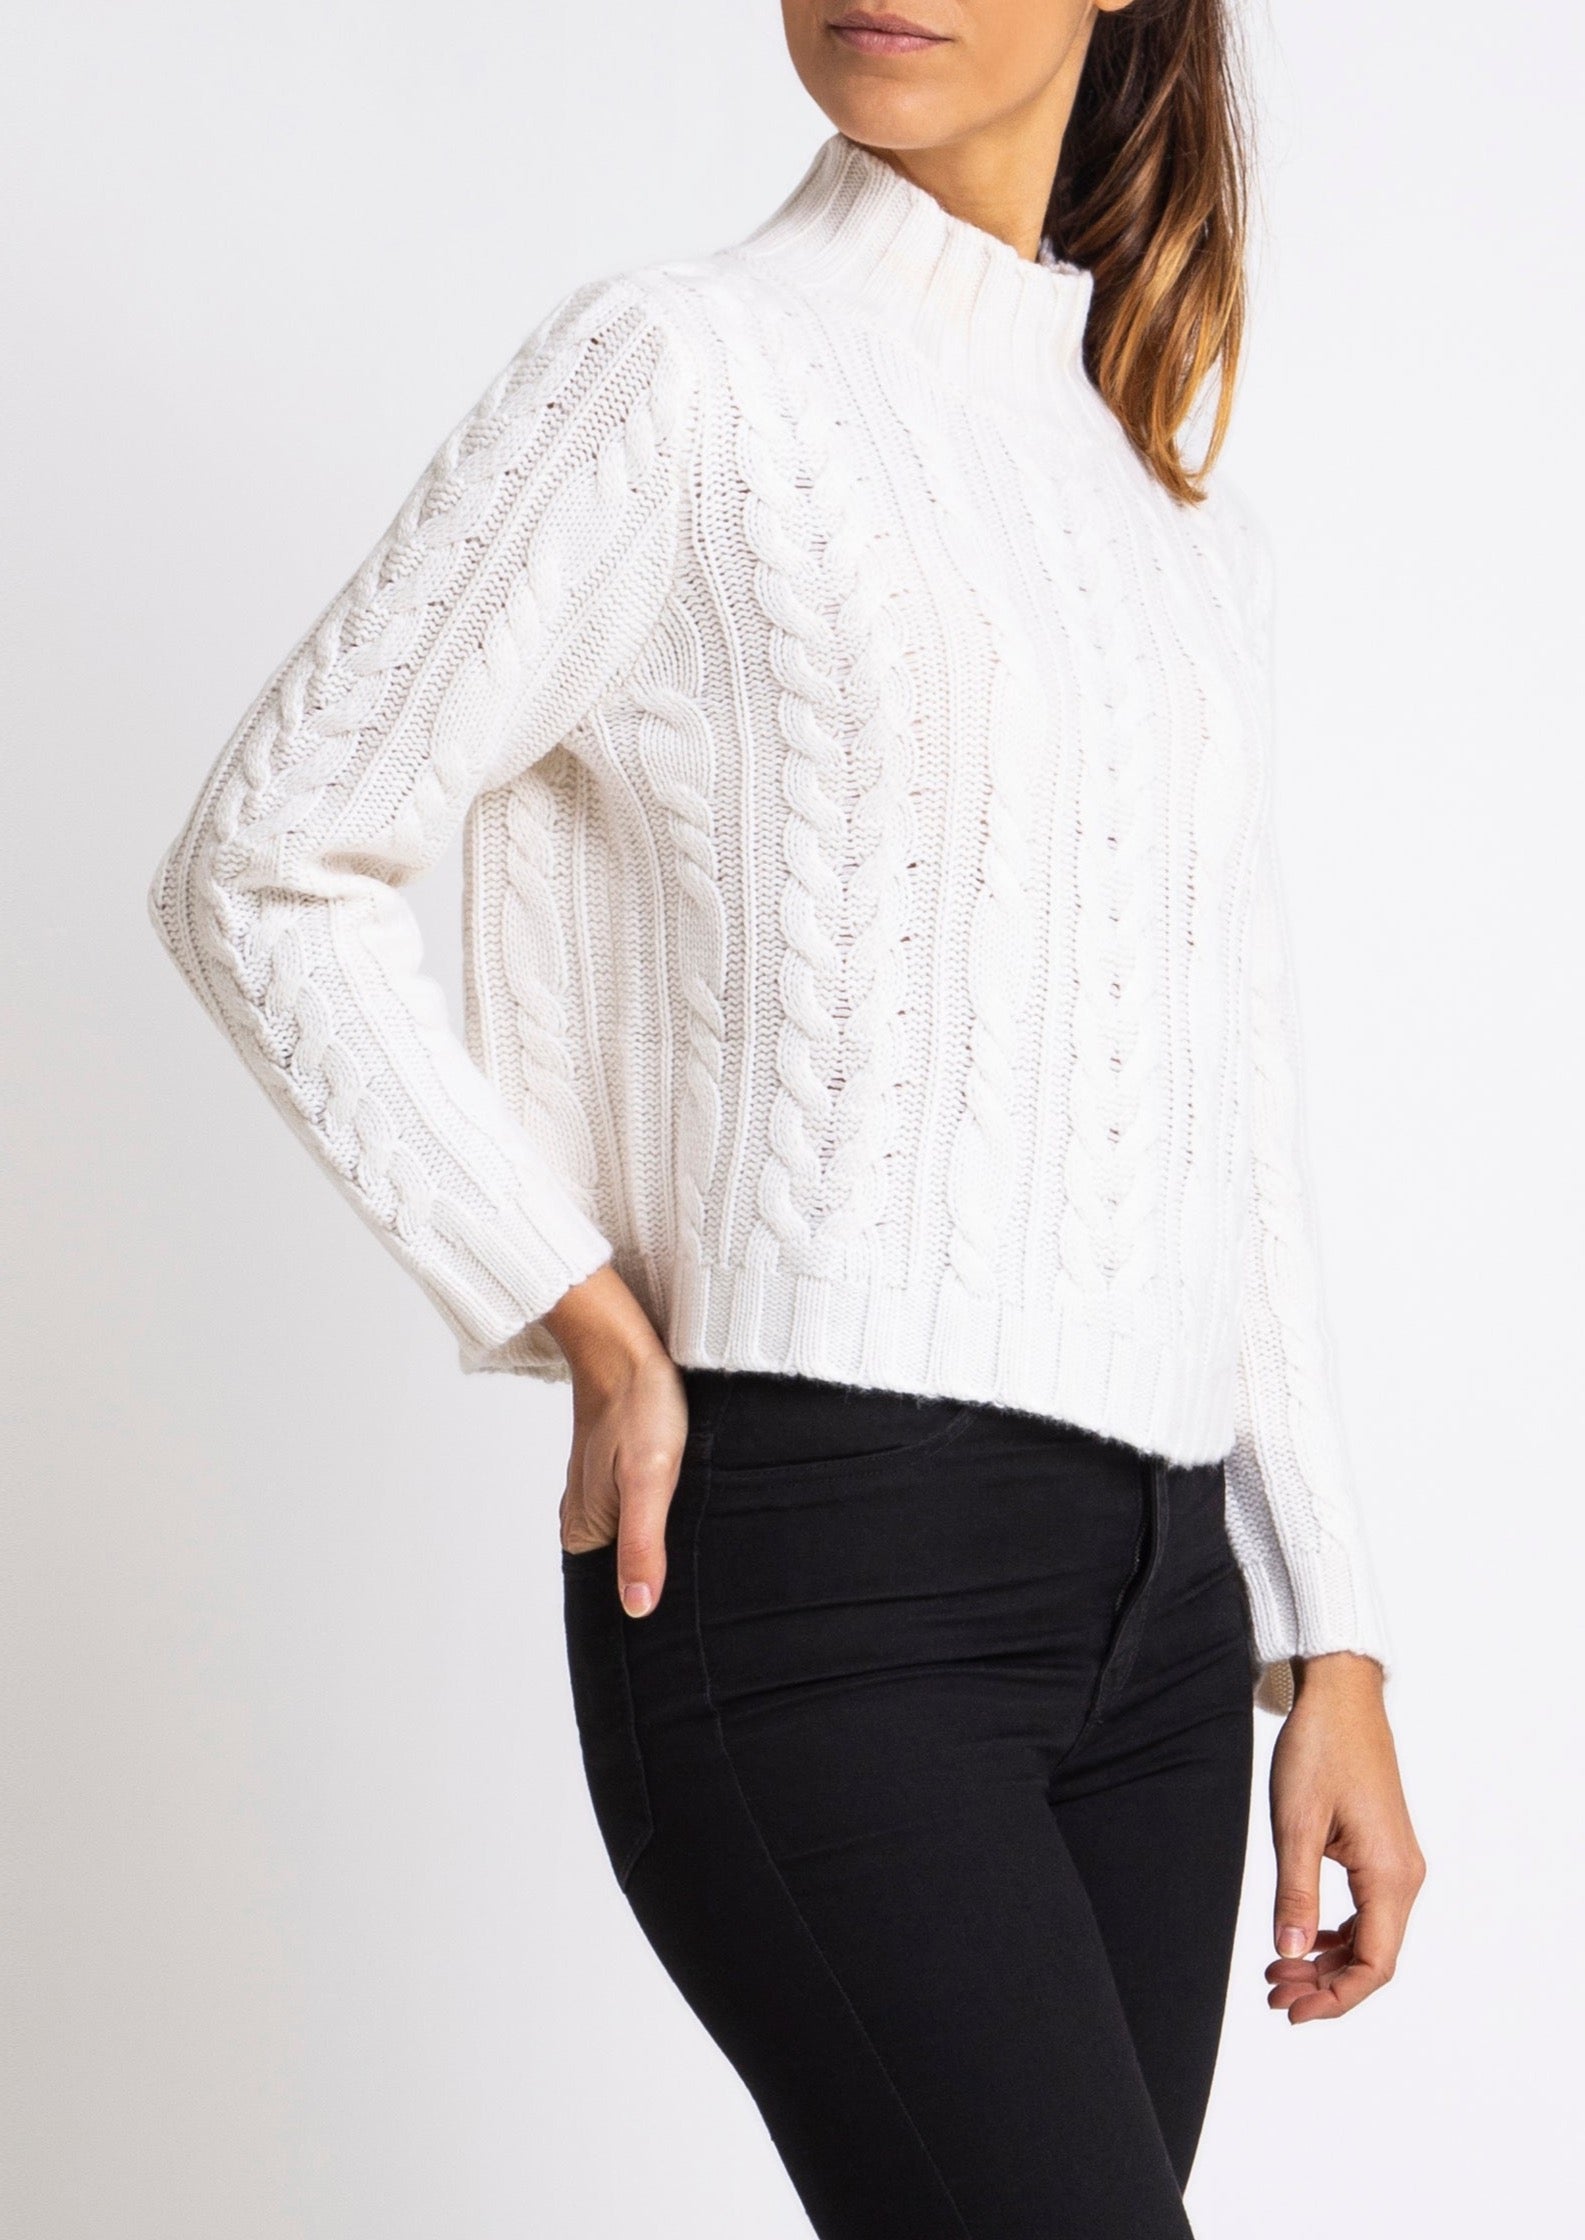 Cashmere Lauren Cable knit in Winter White